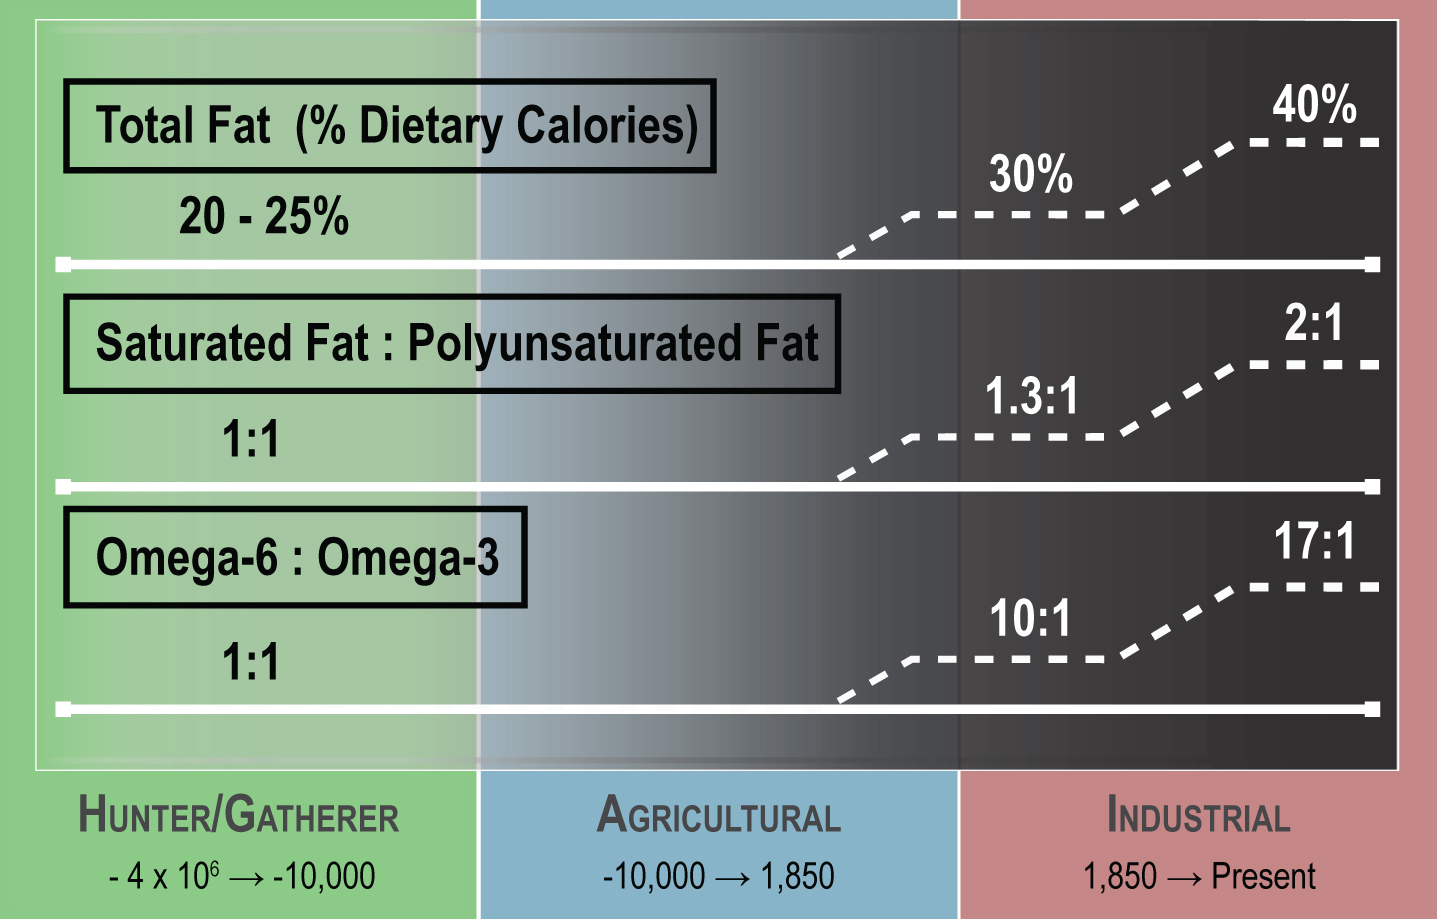 Dietary fat composition changes over human existence. Human food composition has changed considerably over the course of time. Dietary fat accounted for at most 25% of total calories in the early Hunter/Gatherer time period but has increased to as much as 40% in the present day. The fat composition in the diet has also changed over time, with a higher ratio of saturated fat to polyunsaturated fat and a greater omega-6 to omega-3 ratio in the modern era when compared to earlier time periods. (Figure adapted from [4]).